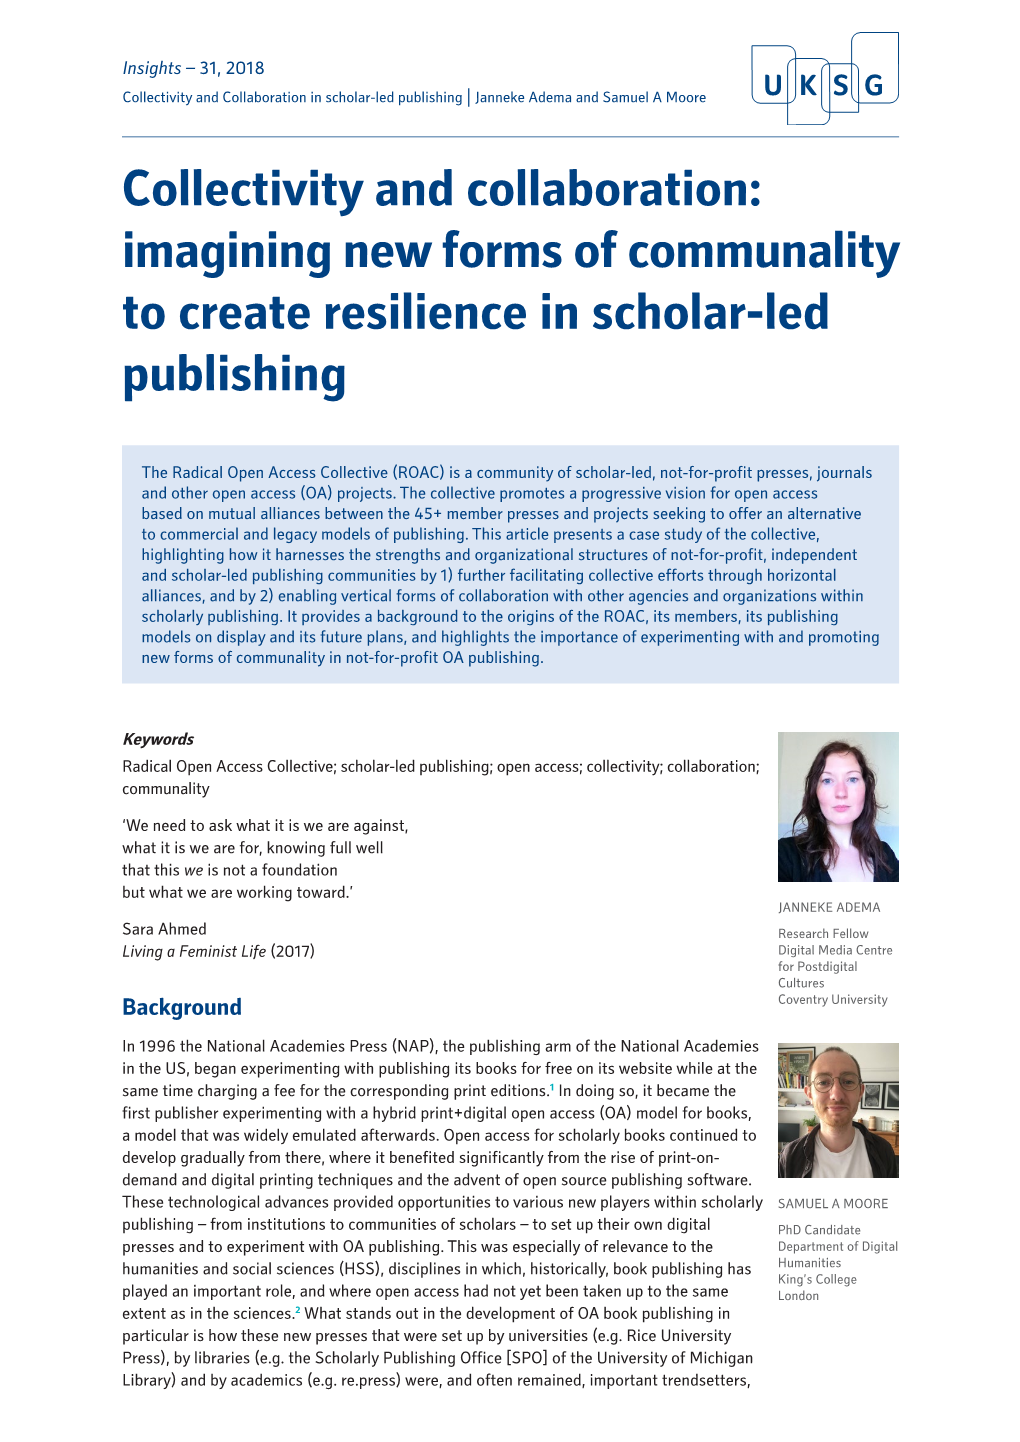 Collectivity and Collaboration: Imagining New Forms of Communality to Create Resilience in Scholar-Led Publishing